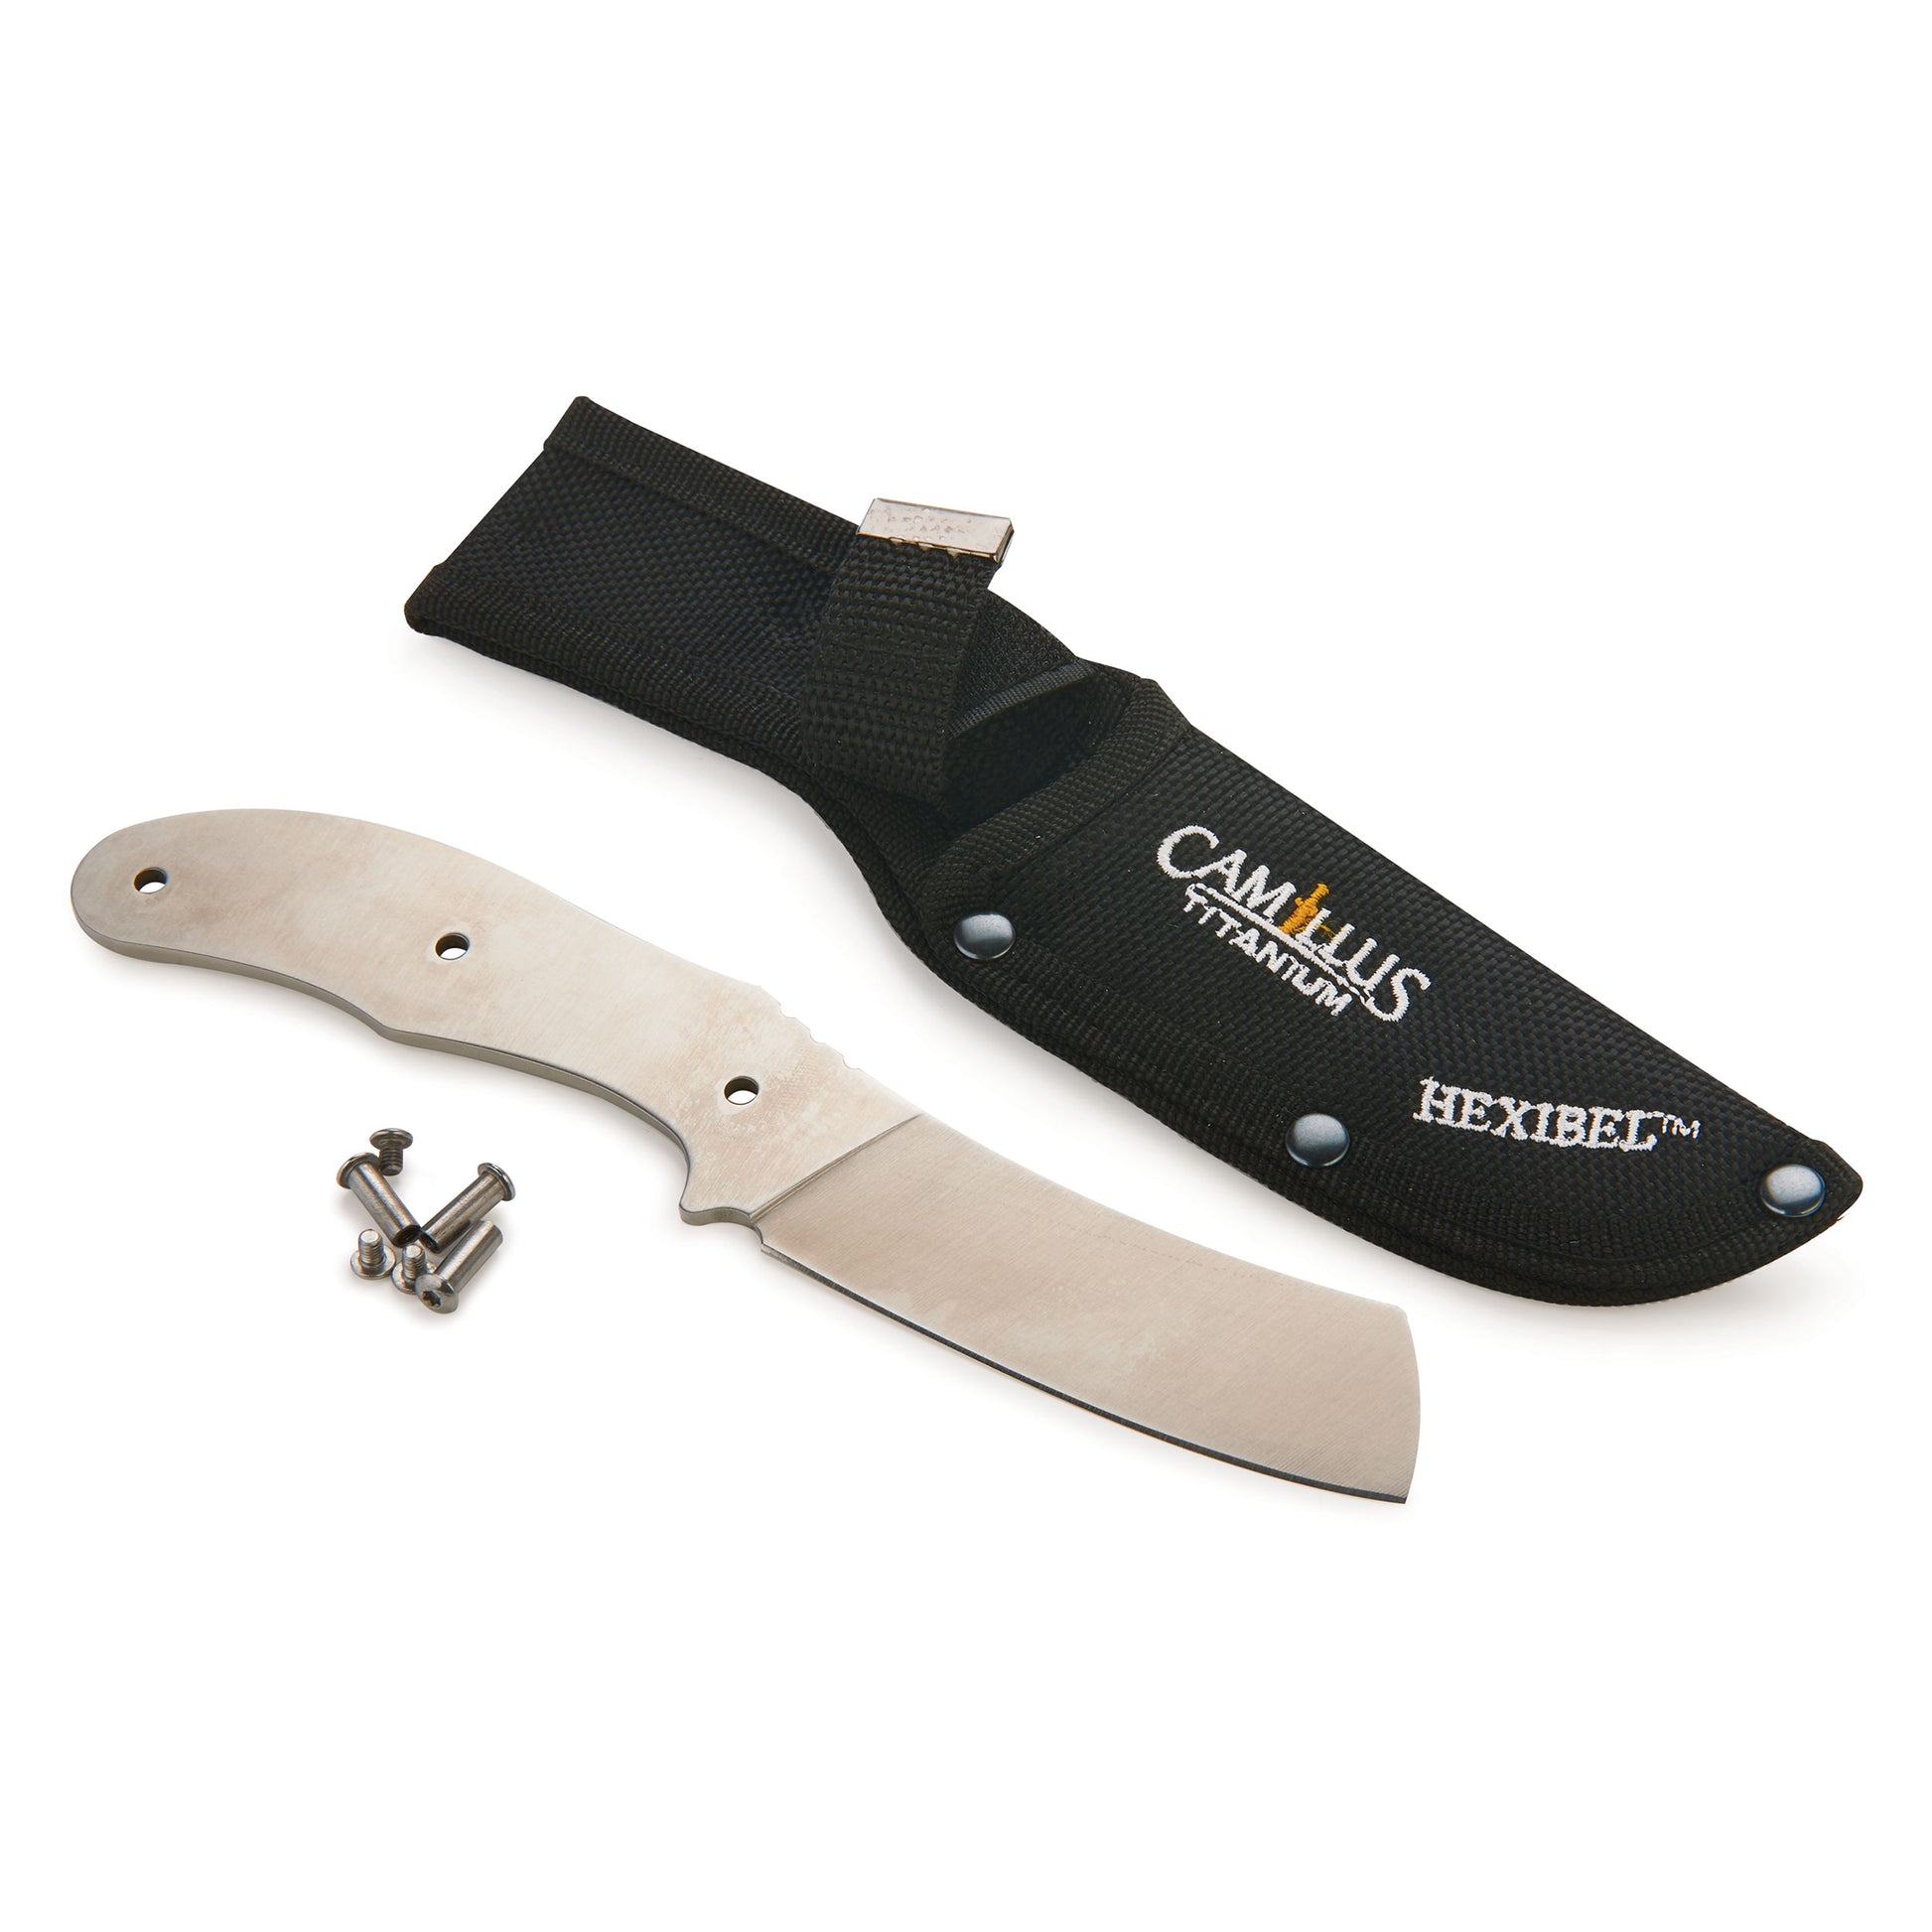 Camillus Hopper Fixed Blade Knife for Hunting and Fishing - 7-1/2